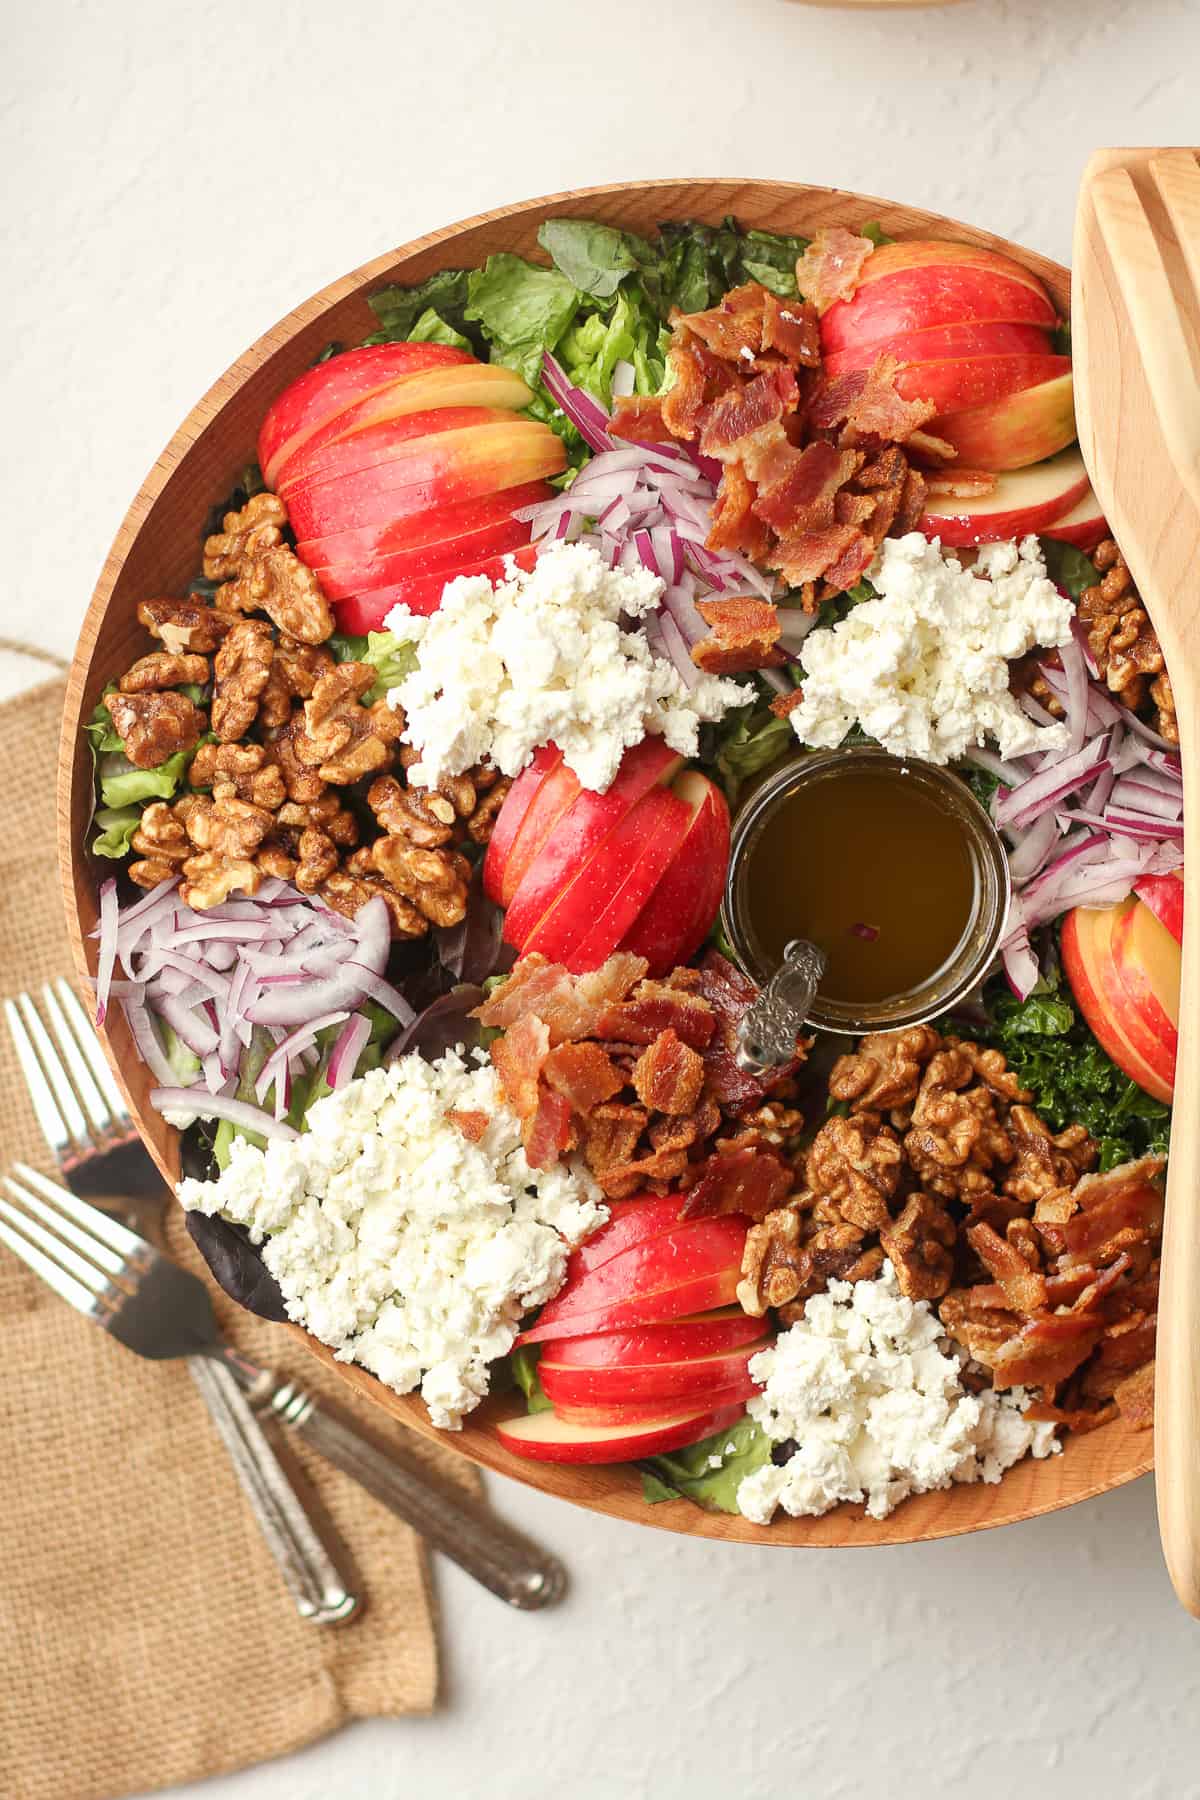 A wooden bowl of the fall harvest salad with apple slices, bacon, candied walnuts, and goat cheese.